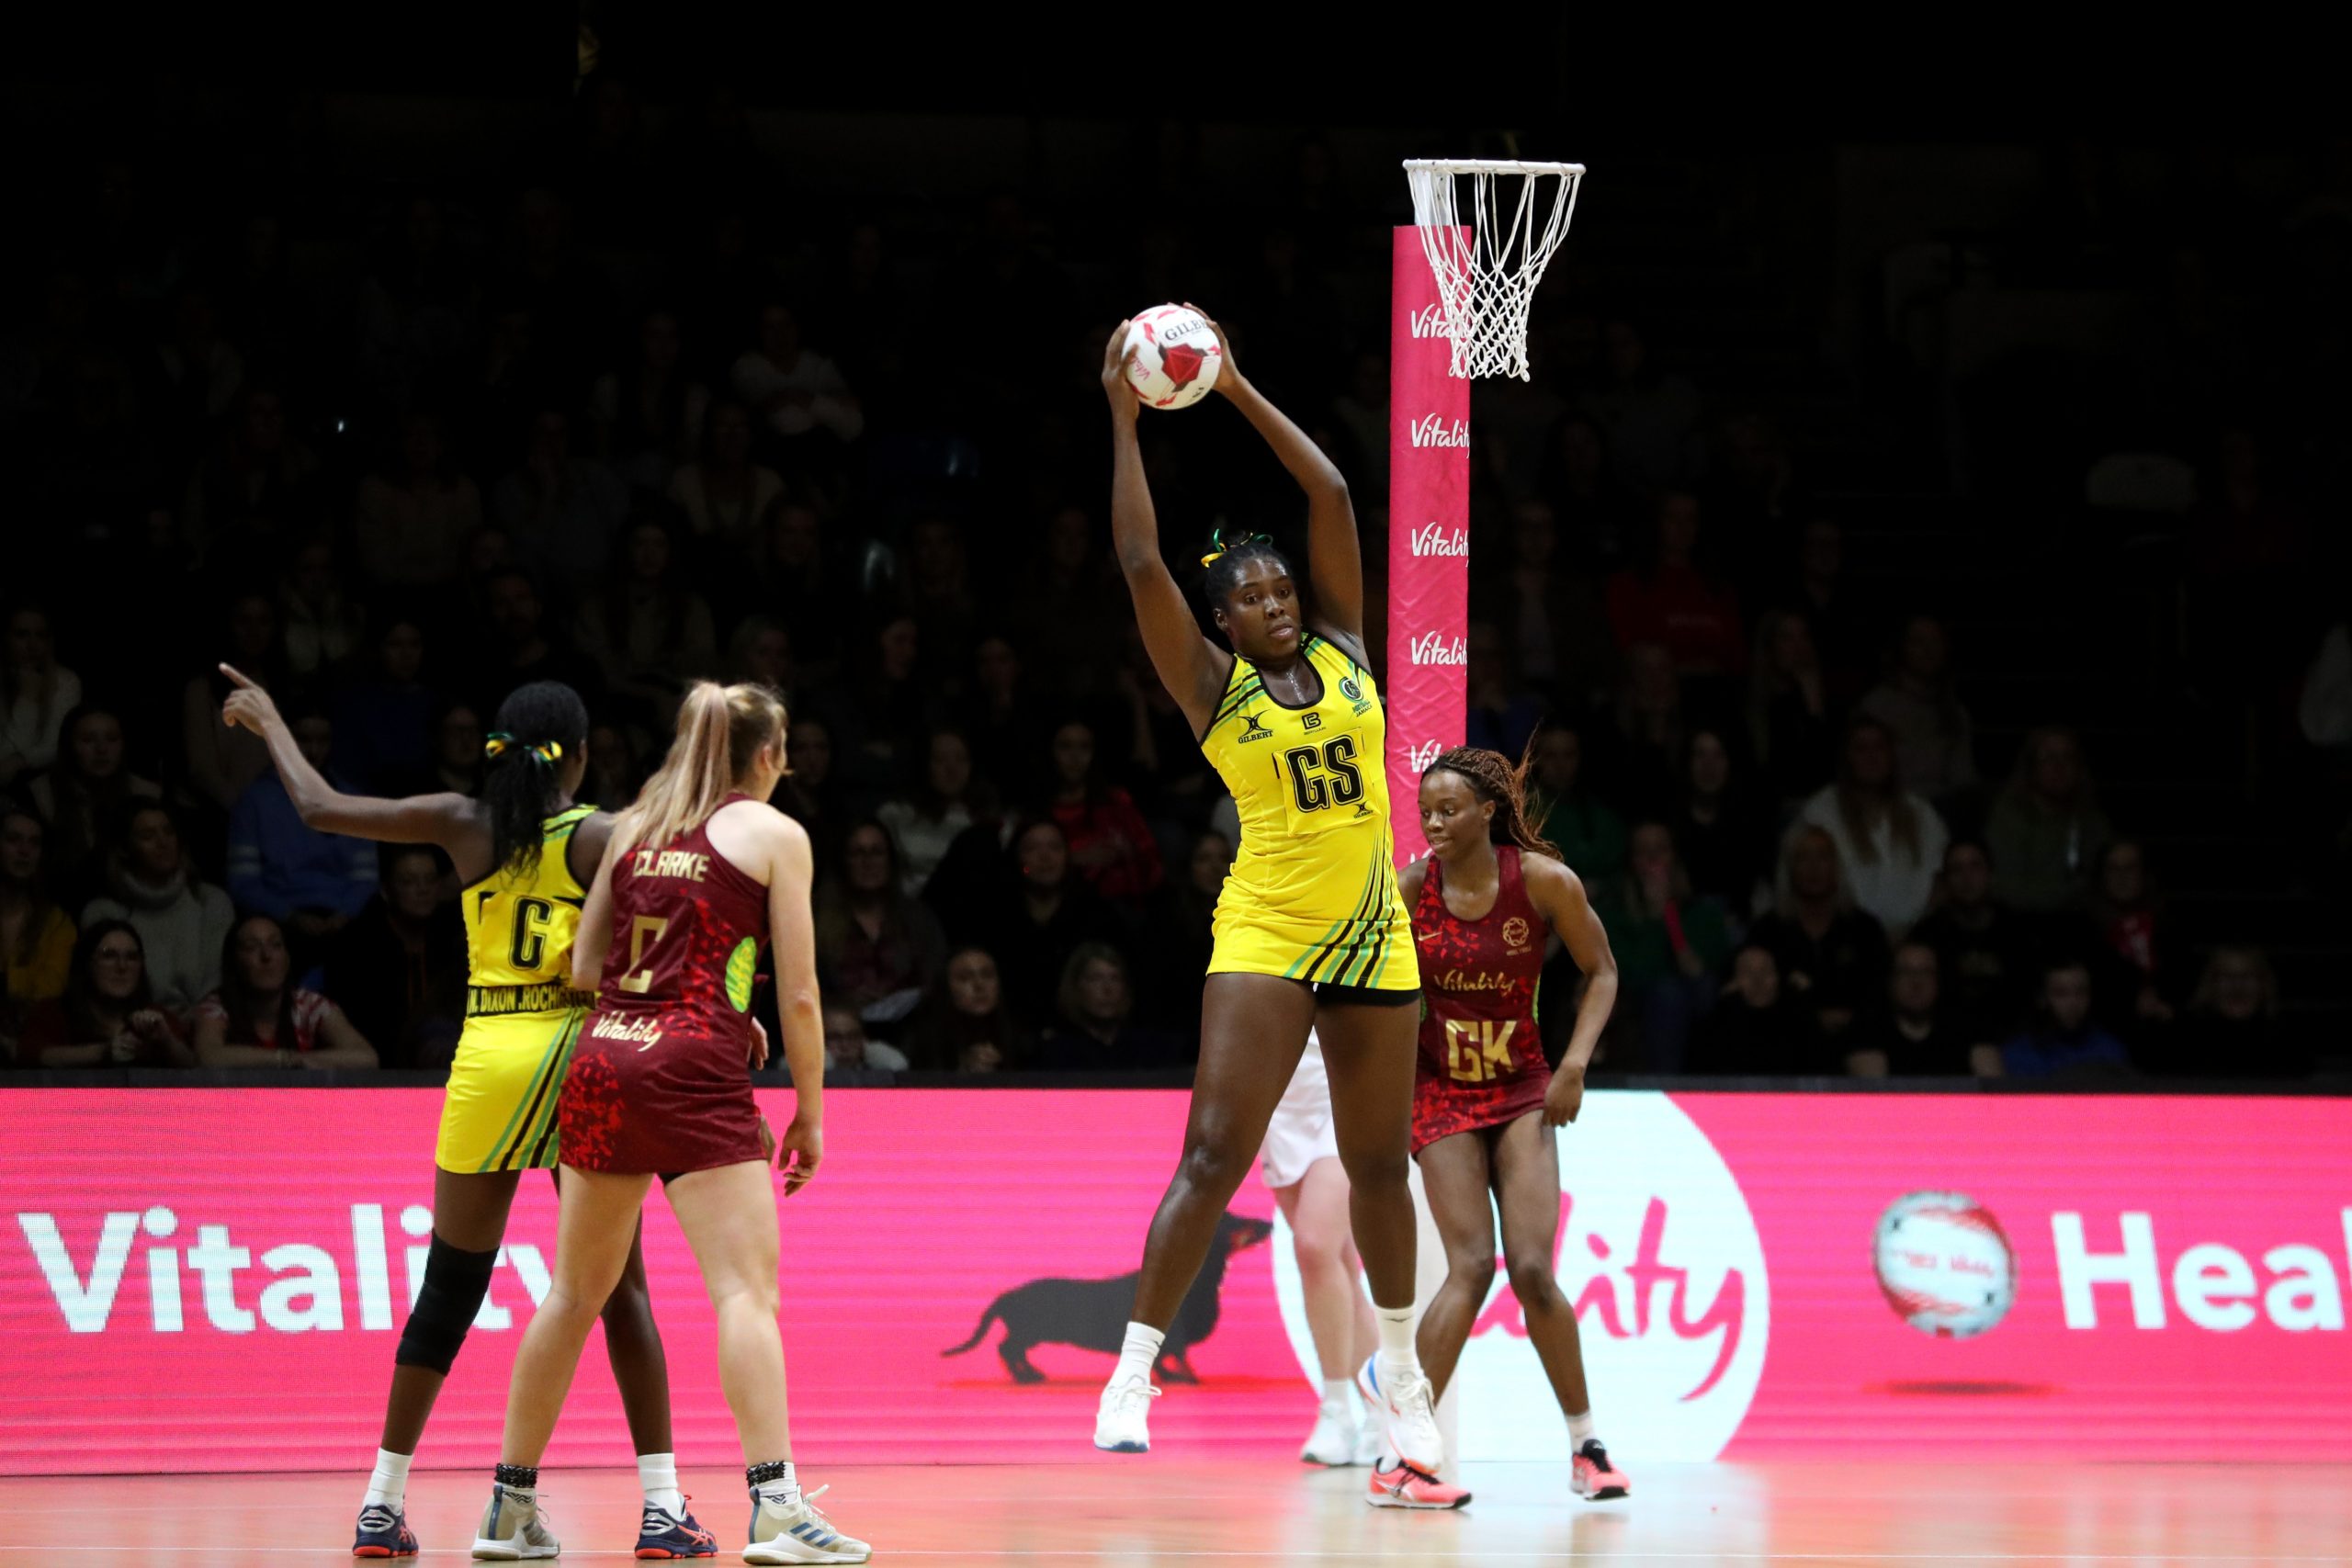 Jamaica's Jhaniele Fowler takes a pass uncontested. Imge: Morgan Harlow